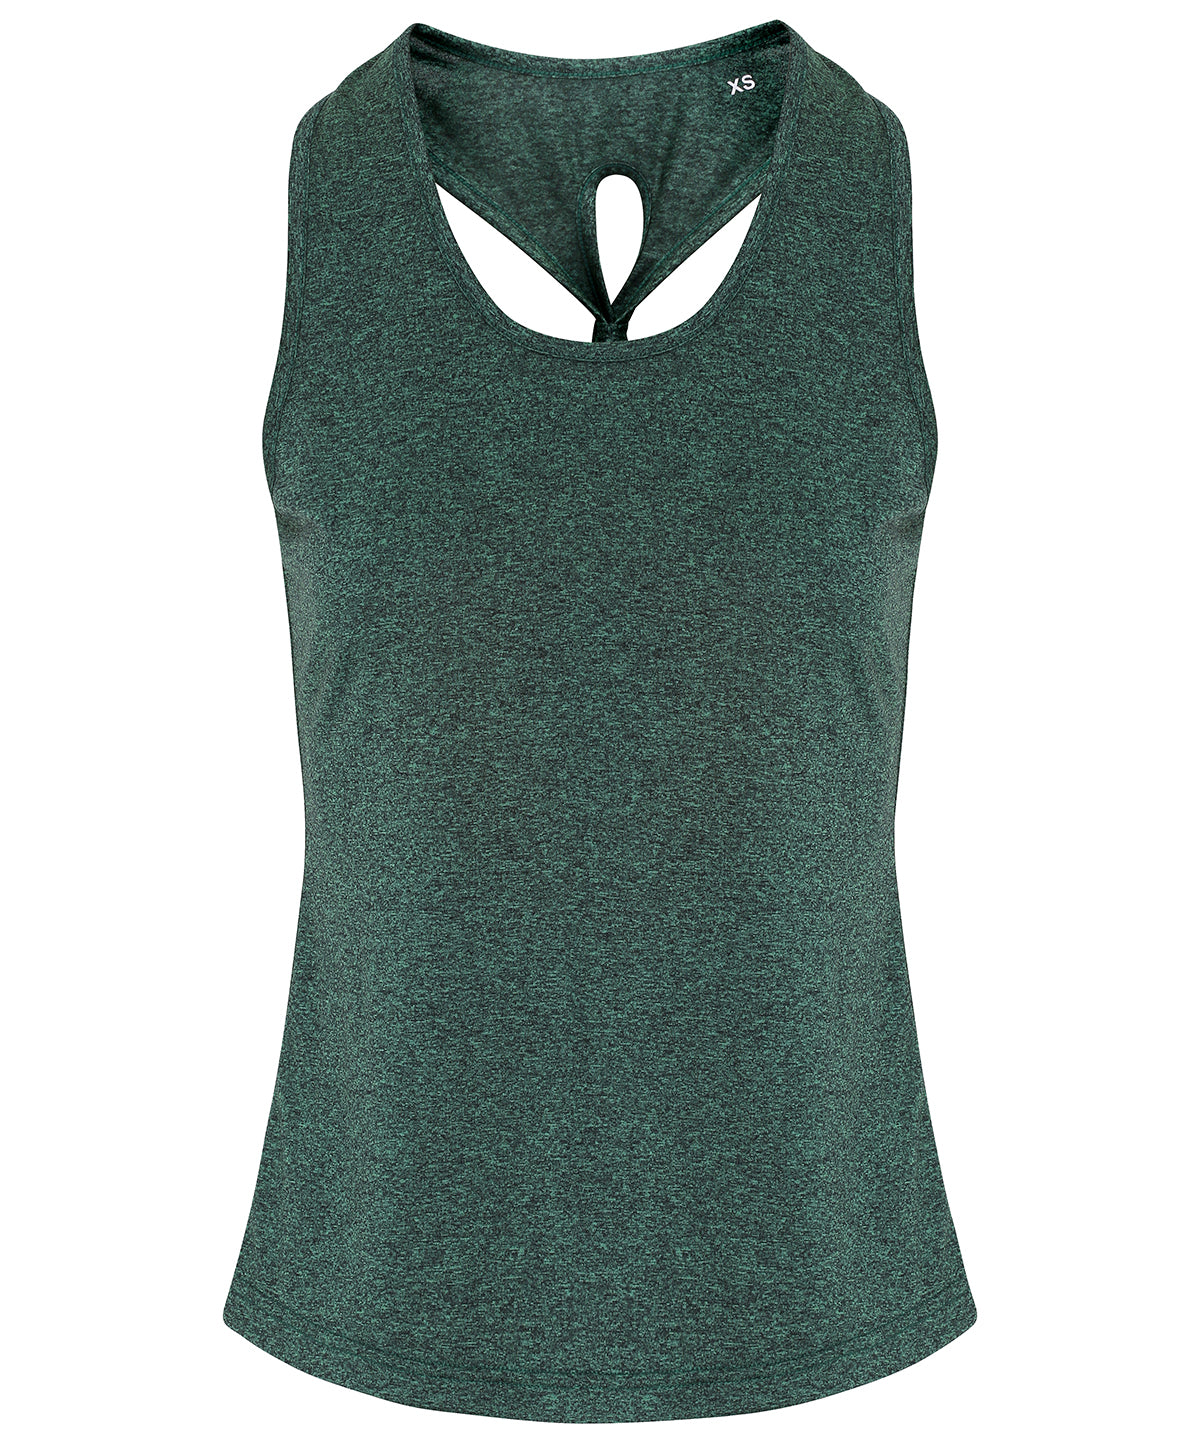 Forest Green/Black Melange - Women's TriDri® yoga knot vest Vests TriDri® Activewear & Performance, Back to the Gym, Exclusives, Rebrandable, Sports & Leisure, T-Shirts & Vests, UPF Protection Schoolwear Centres